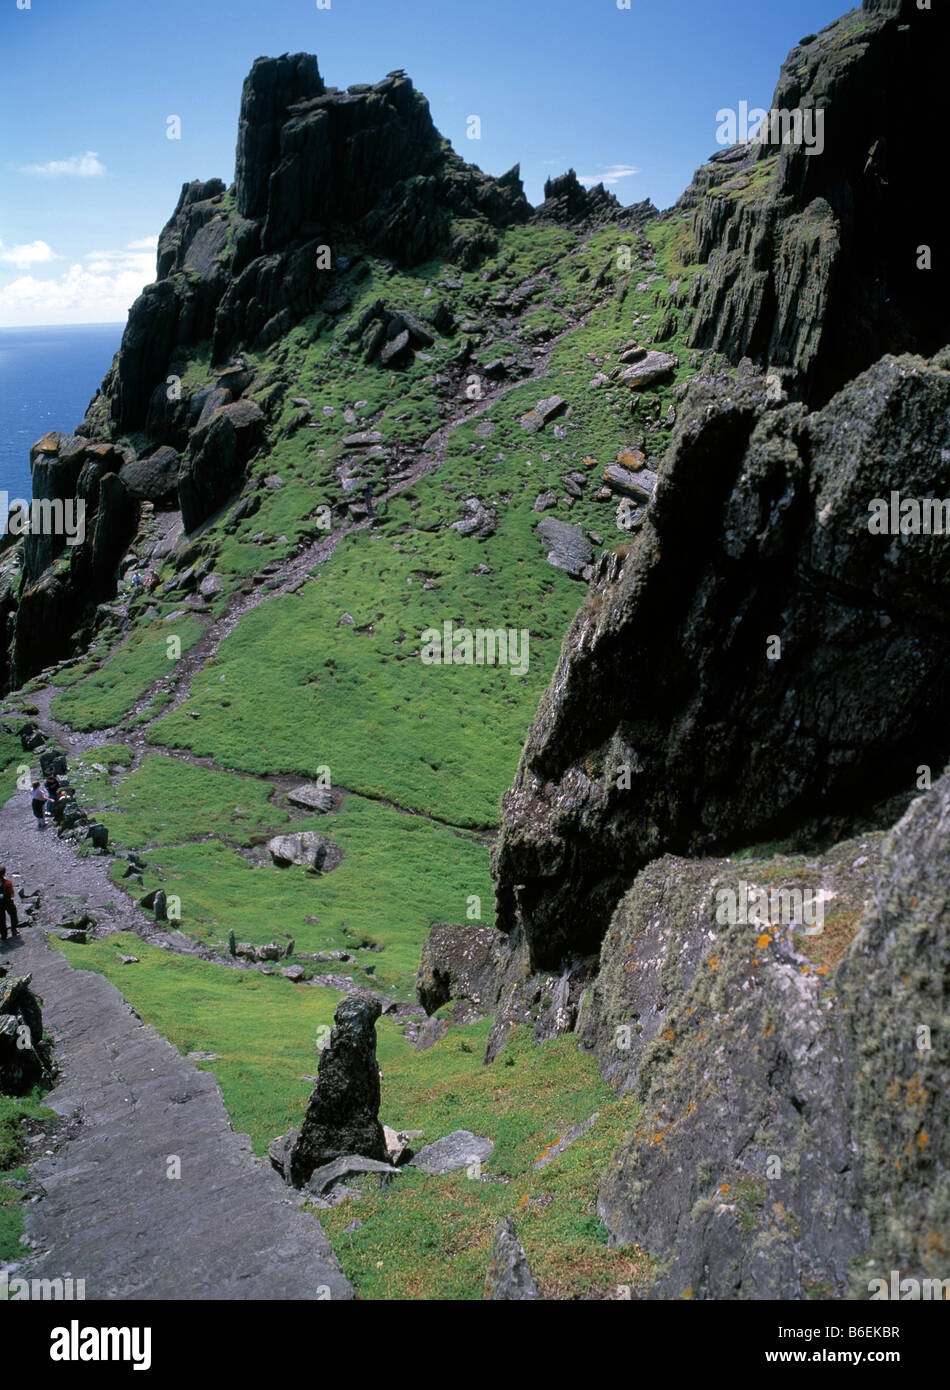 ireland county  co kerry iveragh peninsula, skellig michael,  place of penance, religious monastic ruins relics sea bird Stock Photo